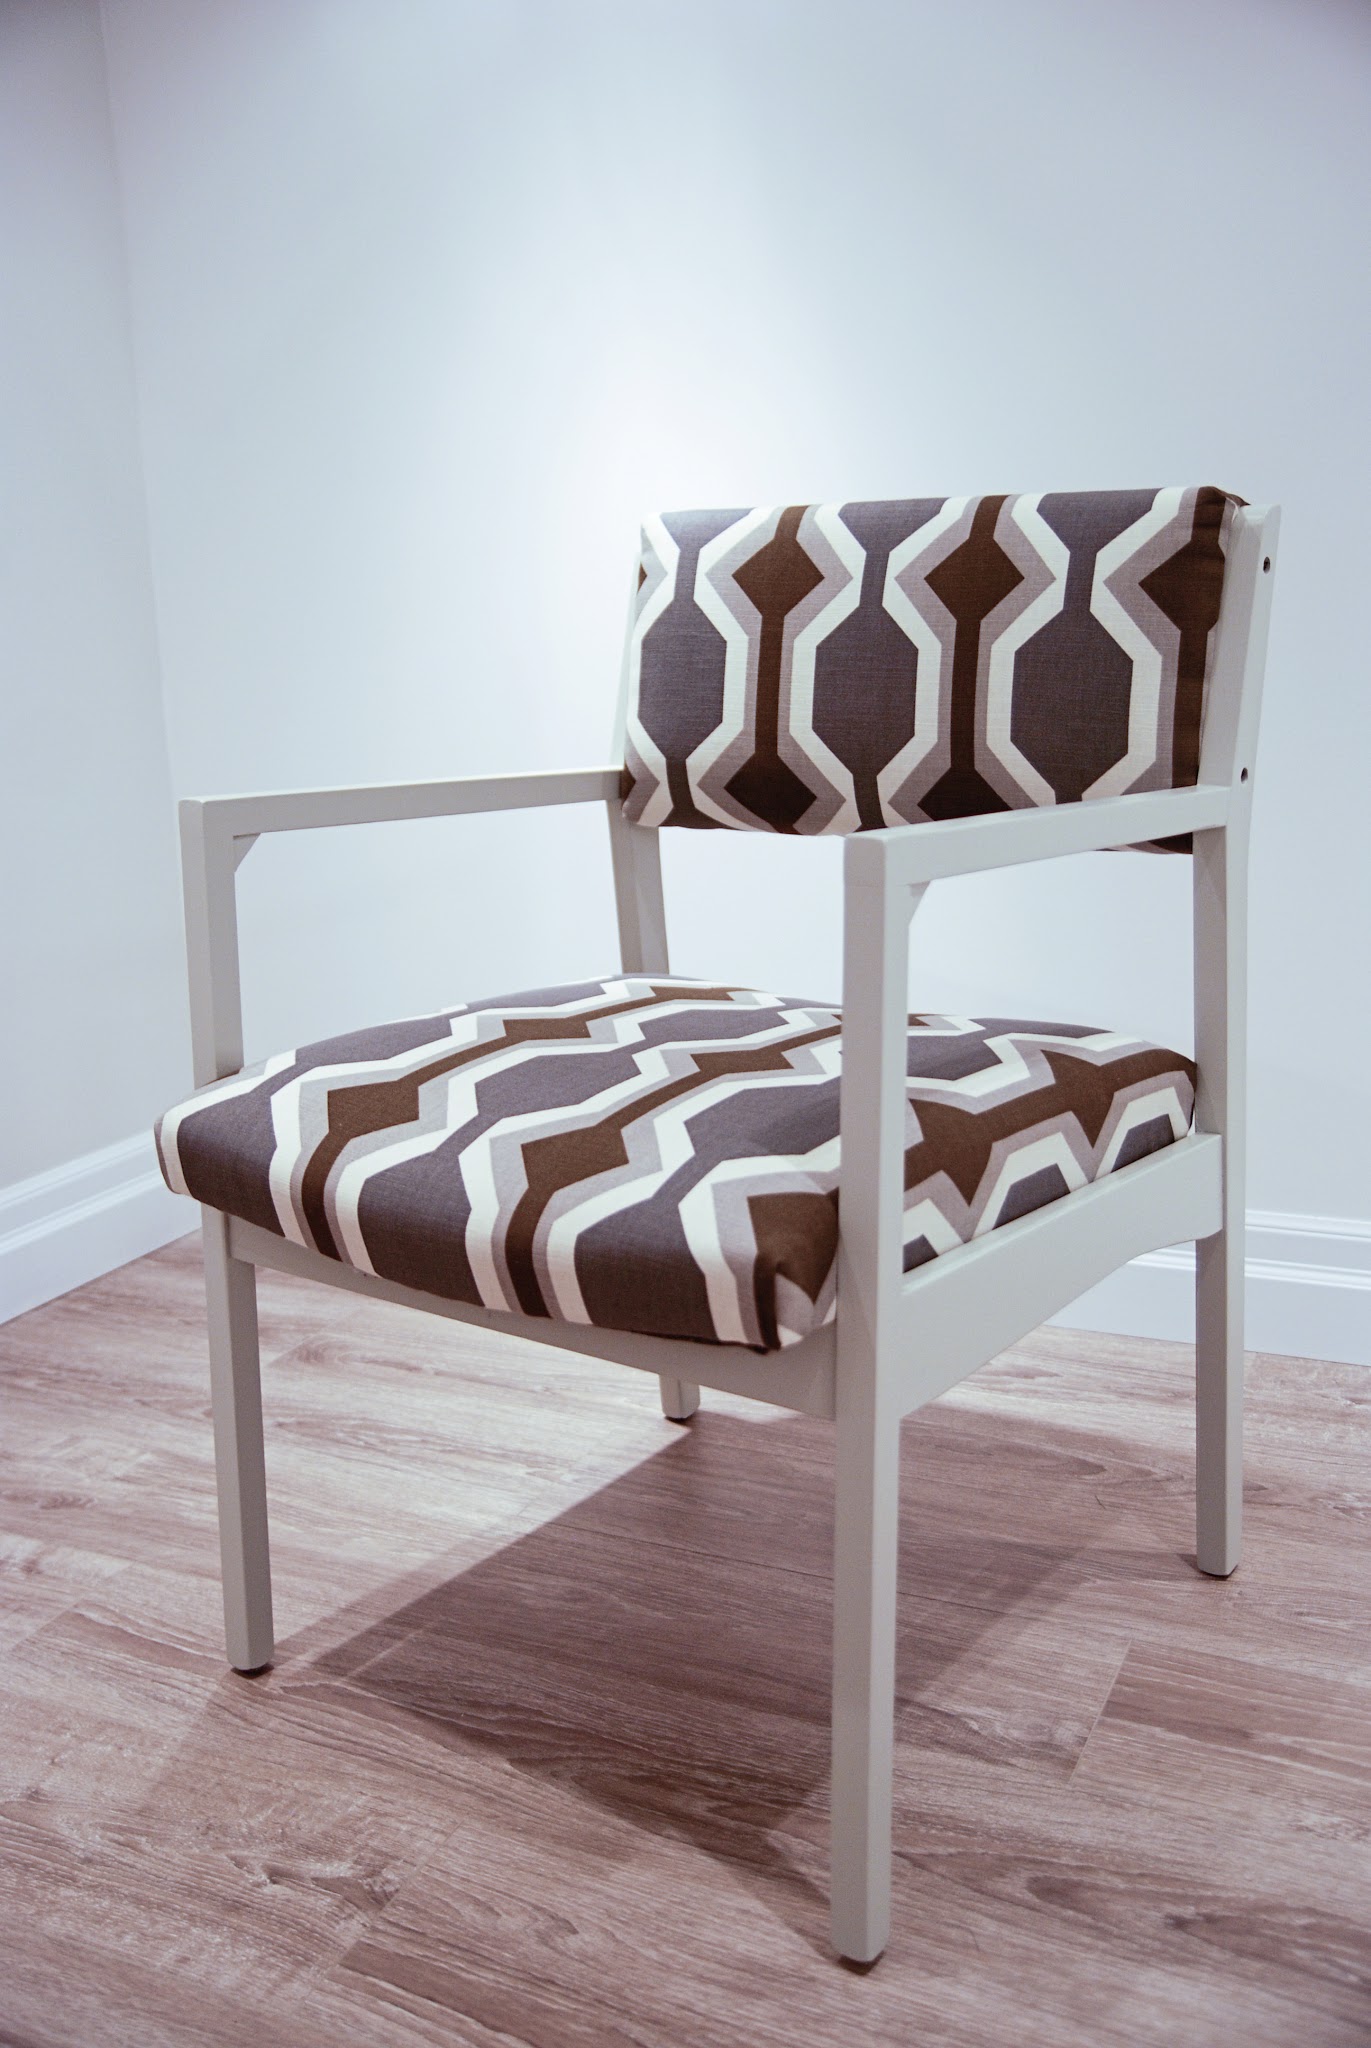 how to reupholster a chair, diy chair makeover, diy chair reupholstery